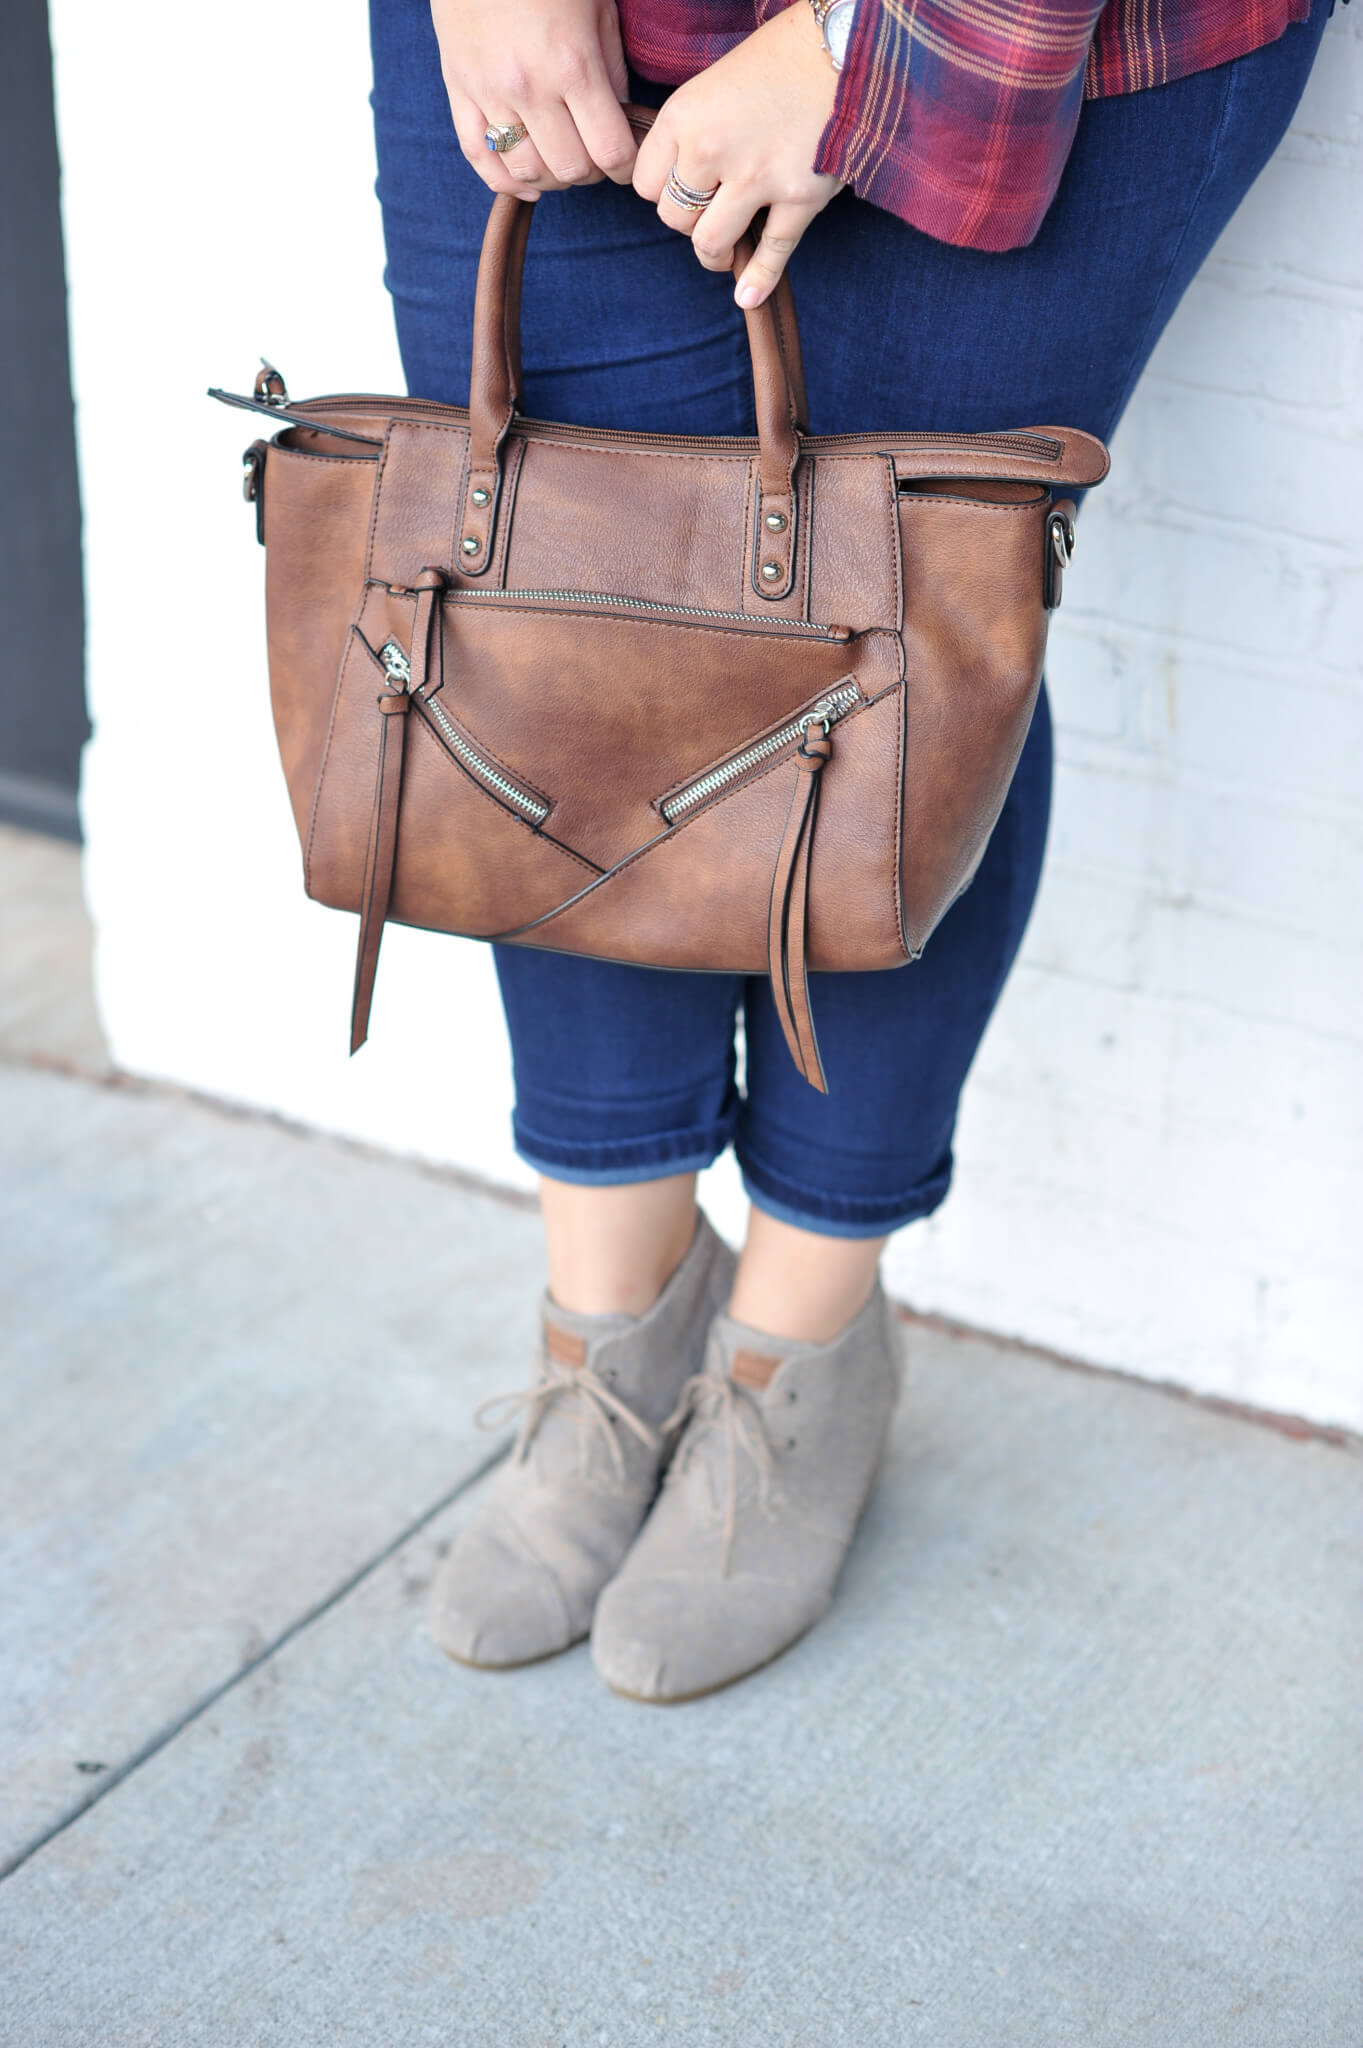 Emily Bastedo from the curvy style blog, Something Gold, Something Blue shares a great fall transition outfit with this adorable off the shoulder plaid top from Anthropolgie, a pair of skinny jeans, Toms wedges and a gorgeous bag from Pinkstix.